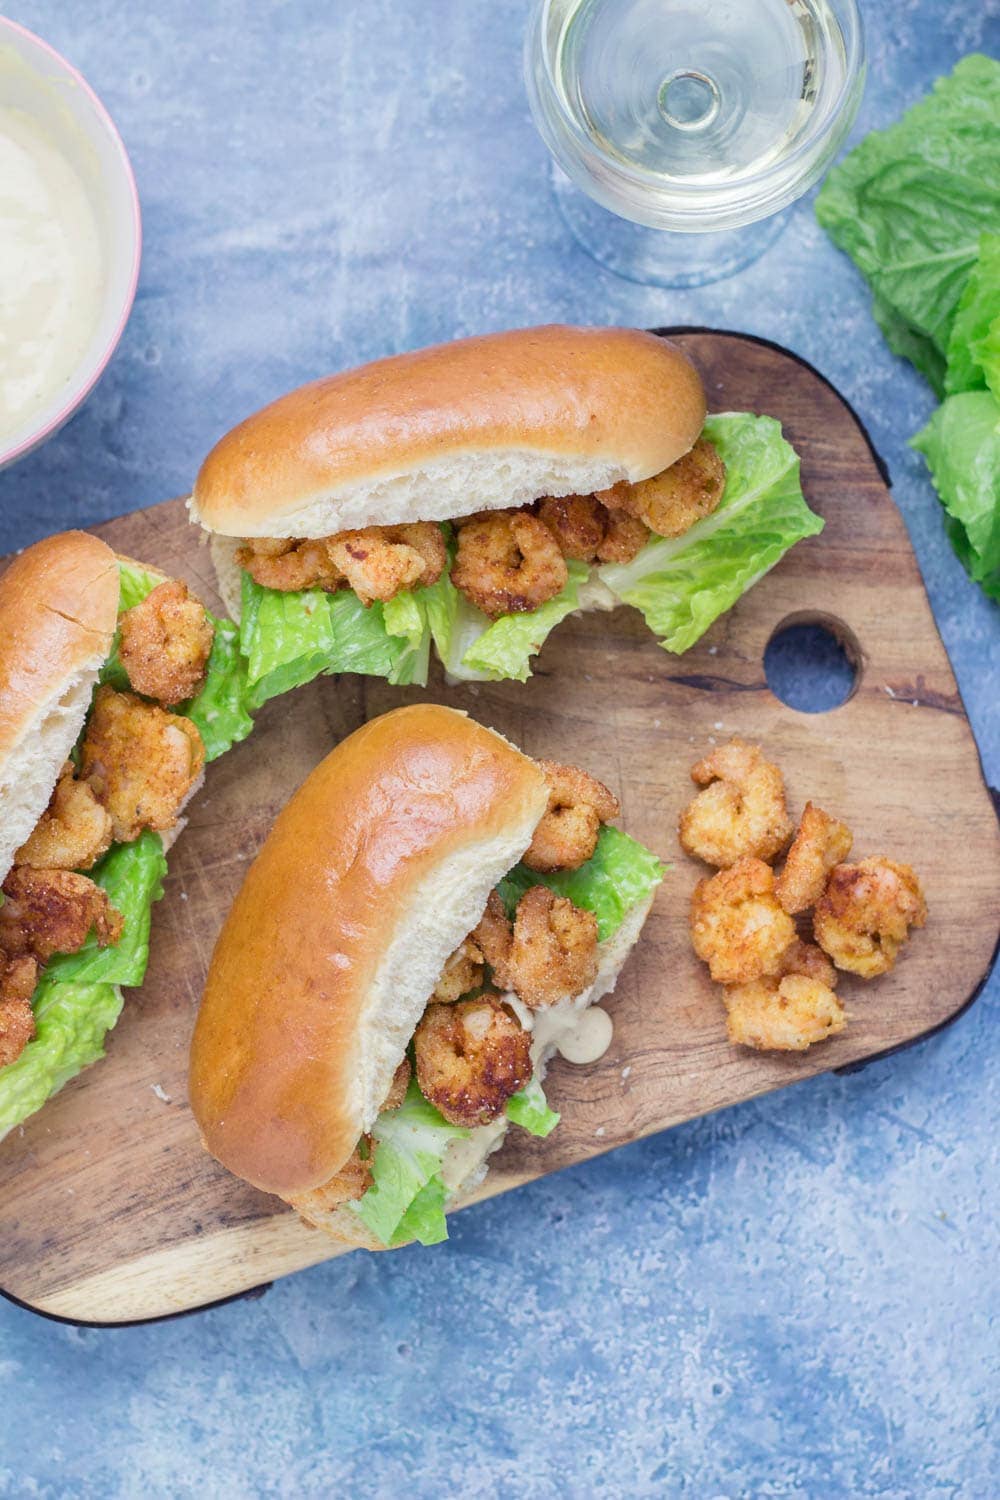 Prawn po' boys are made up of crispy prawns nestled into a bread roll with crunchy lettuce & tangy Cajun sauce. Bring a taste of New Orleans to your home! #sandwich #seafood #poboy #cajunfood #recipe